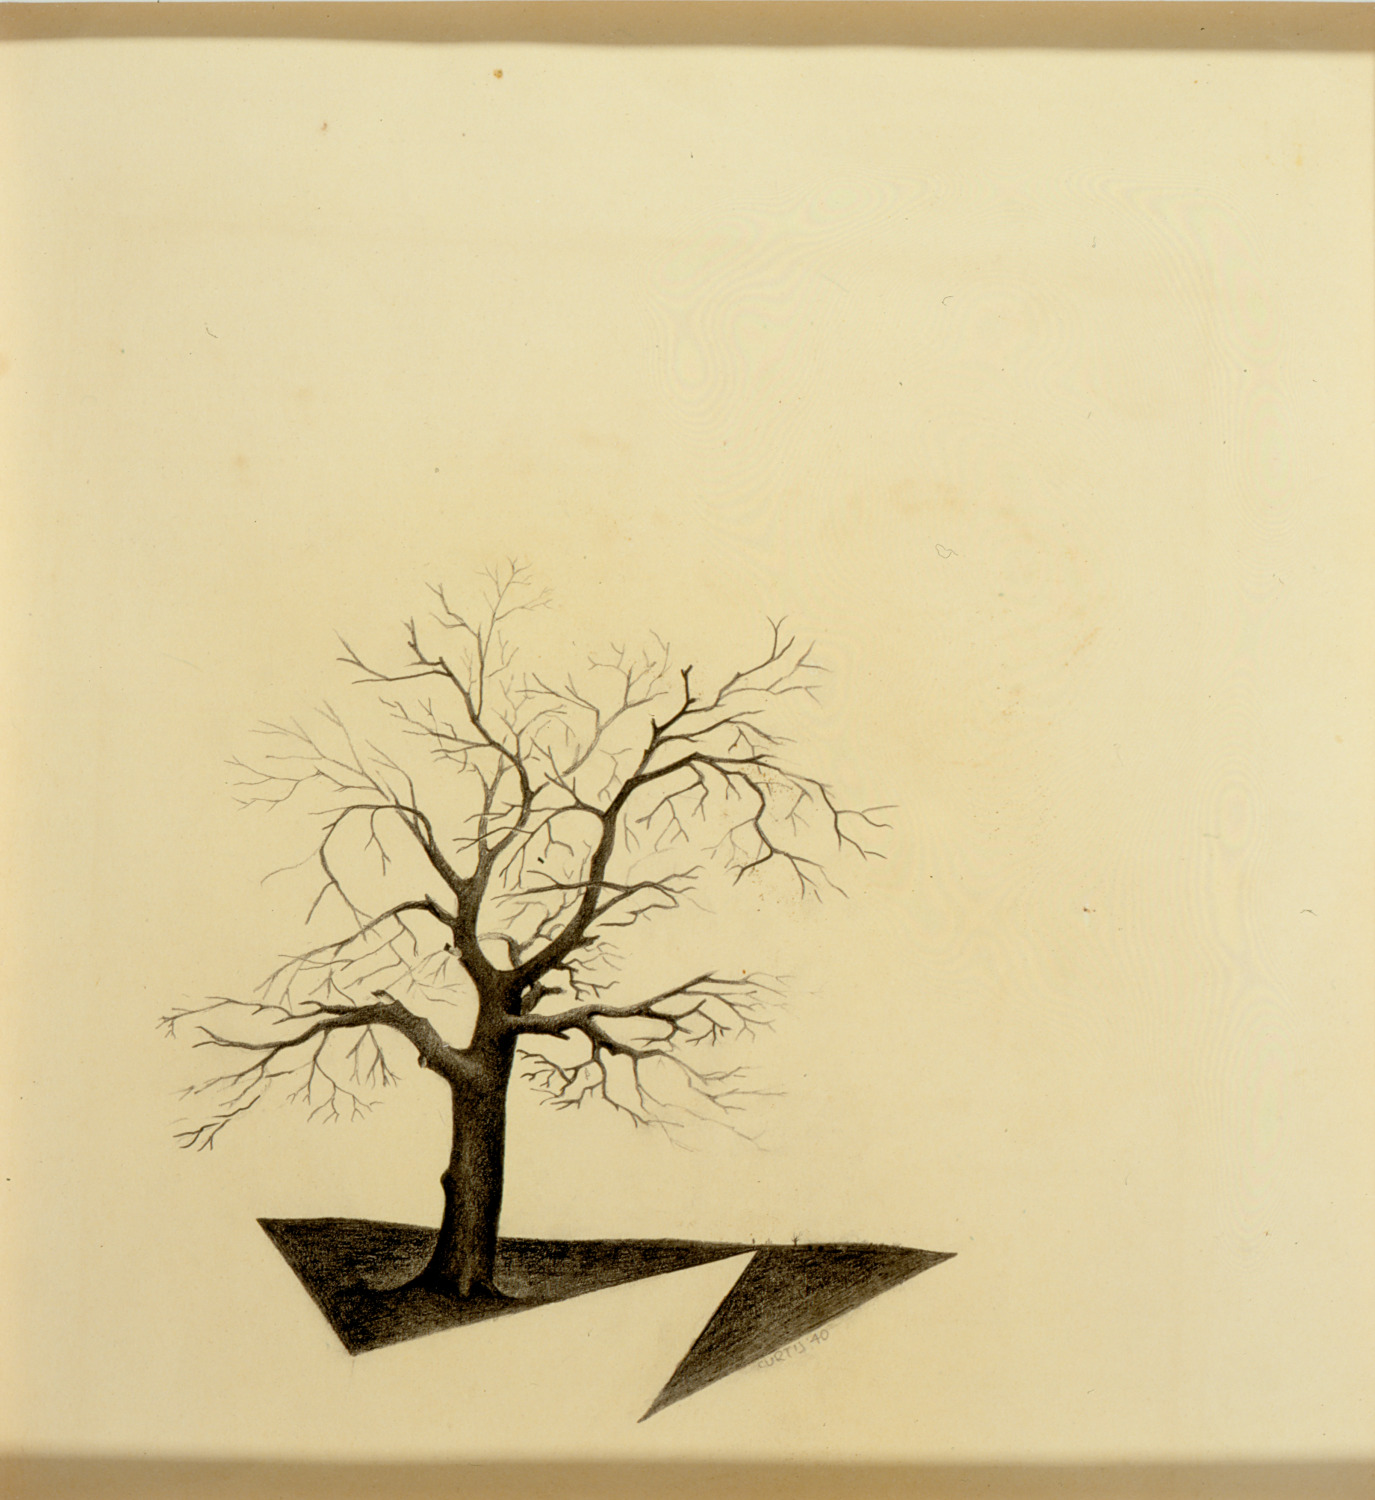 Philip C. Curtis, Landscape with Tree (Paisaje con árbol), 1940. Pencil on paper. Gift of the Philip C. Curtis Restated Trust U/A/D April 7, 1994.